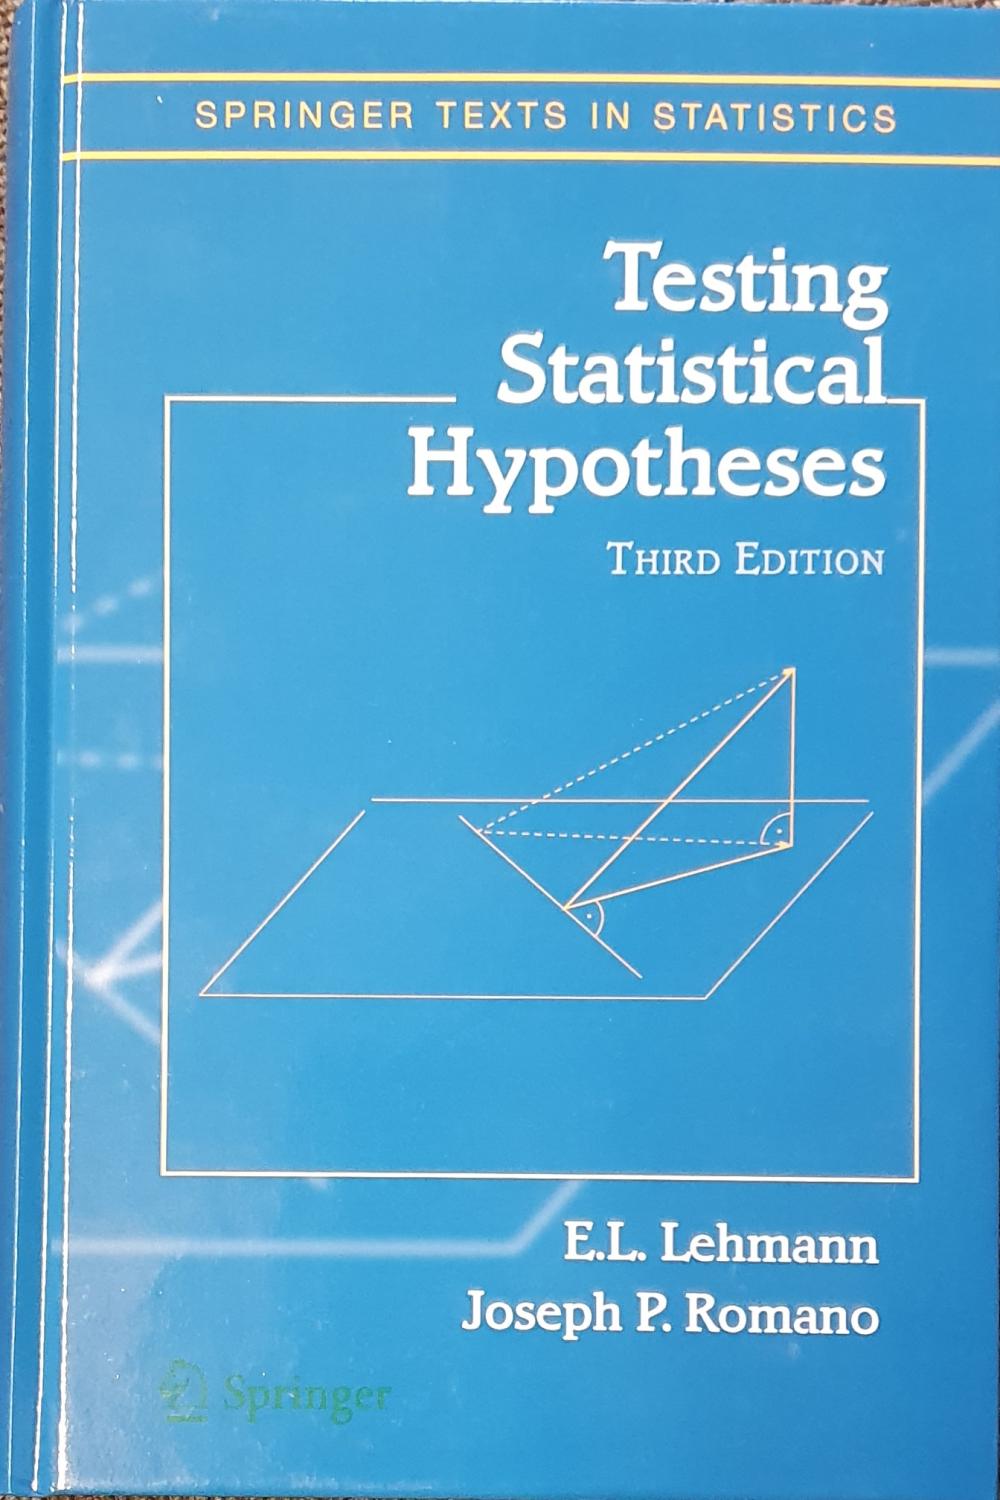  Testing Statistical Hypotheses